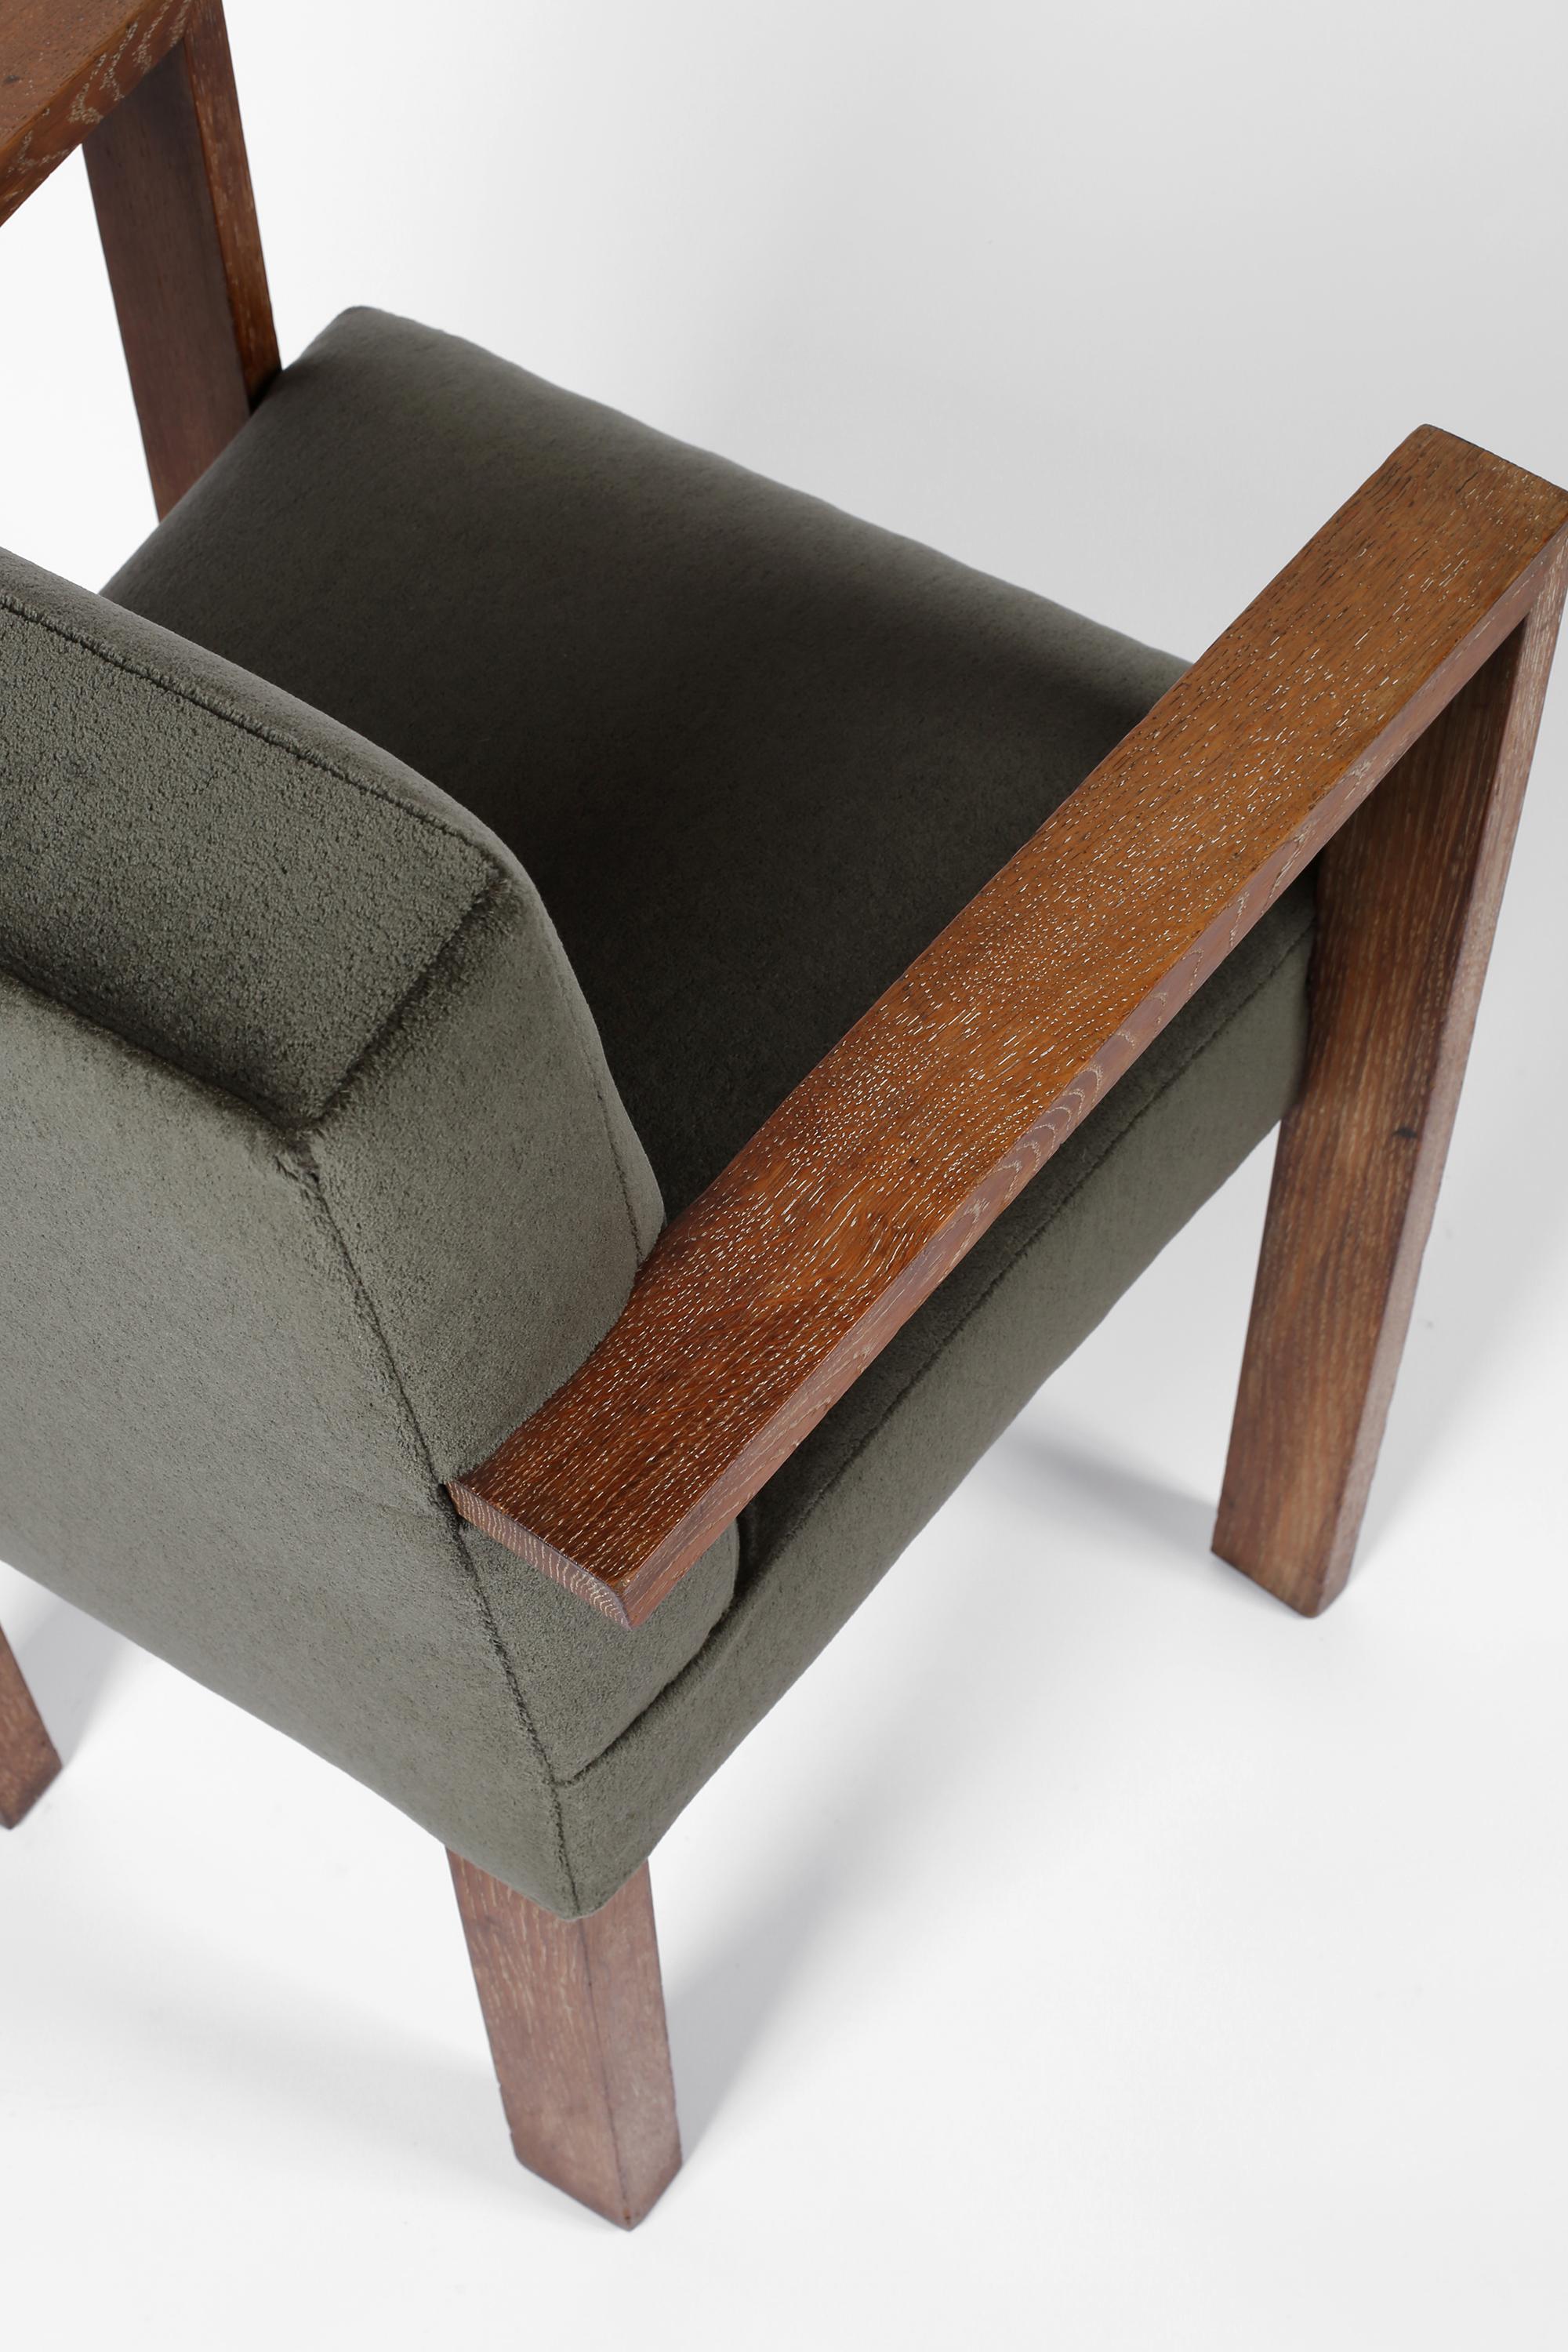 1940s French Modernist Armchair in Limed Oak and Mohair For Sale 6